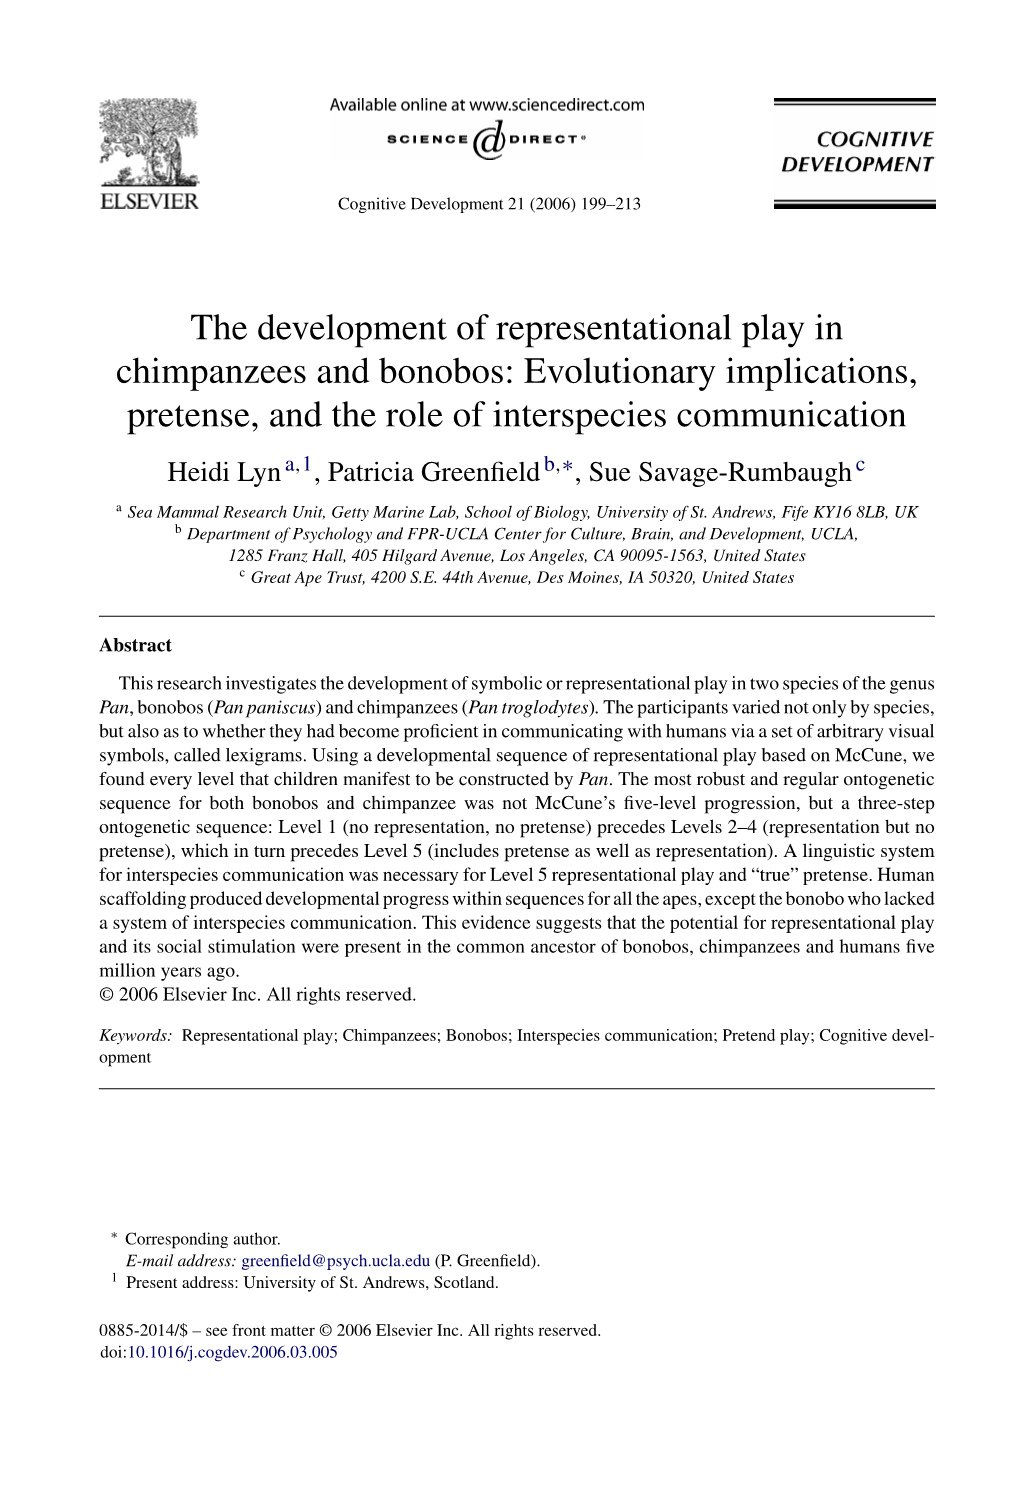 The Development of Representational Play in Chimpanzees